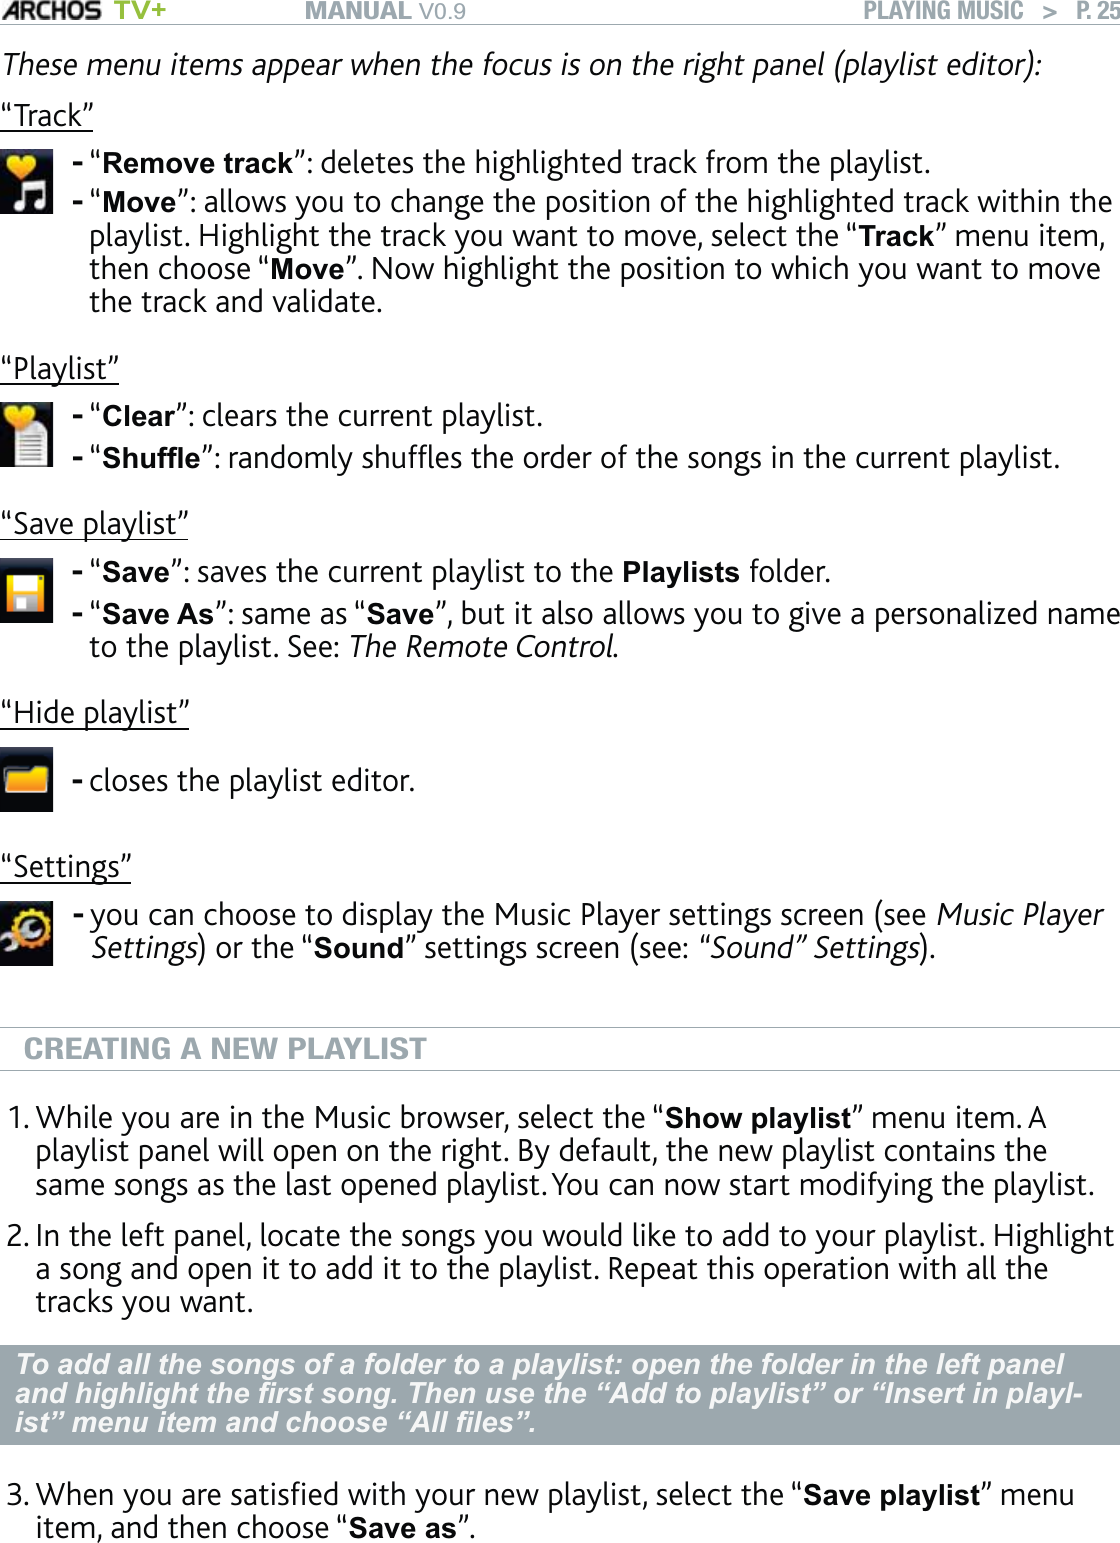 MANUAL V0.9 TV+ PLAYING MUSIC   &gt;   P. 25These menu items appear when the focus is on the right panel (playlist editor):“Track”“Remove track”: deletes the highlighted track from the playlist.“Move”: allows you to change the position of the highlighted track within the playlist. Highlight the track you want to move, select the “Track” menu item, then choose “Move”. Now highlight the position to which you want to move the track and validate.--“Playlist”“Clear”: clears the current playlist.“Shufﬂe”: randomly shufﬂes the order of the songs in the current playlist.--“Save playlist”“Save”: saves the current playlist to the Playlists folder.“Save As”: same as “Save”, but it also allows you to give a personalized name to the playlist. See: The Remote Control.--“Hide playlist”closes the playlist editor.-“Settings”you can choose to display the Music Player settings screen (see Music Player Settings) or the “Sound” settings screen (see: “Sound” Settings).-CREATING A NEW PLAYLISTWhile you are in the Music browser, select the “Show playlist” menu item. A playlist panel will open on the right. By default, the new playlist contains the same songs as the last opened playlist. You can now start modifying the playlist.In the left panel, locate the songs you would like to add to your playlist. Highlight a song and open it to add it to the playlist. Repeat this operation with all the tracks you want. To add all the songs of a folder to a playlist: open the folder in the left panel and highlight the ﬁrst song. Then use the “Add to playlist” or “Insert in playl-ist” menu item and choose “All ﬁles”.When you are satisﬁed with your new playlist, select the “Save playlist” menu item, and then choose “Save as”. 1.2.3.